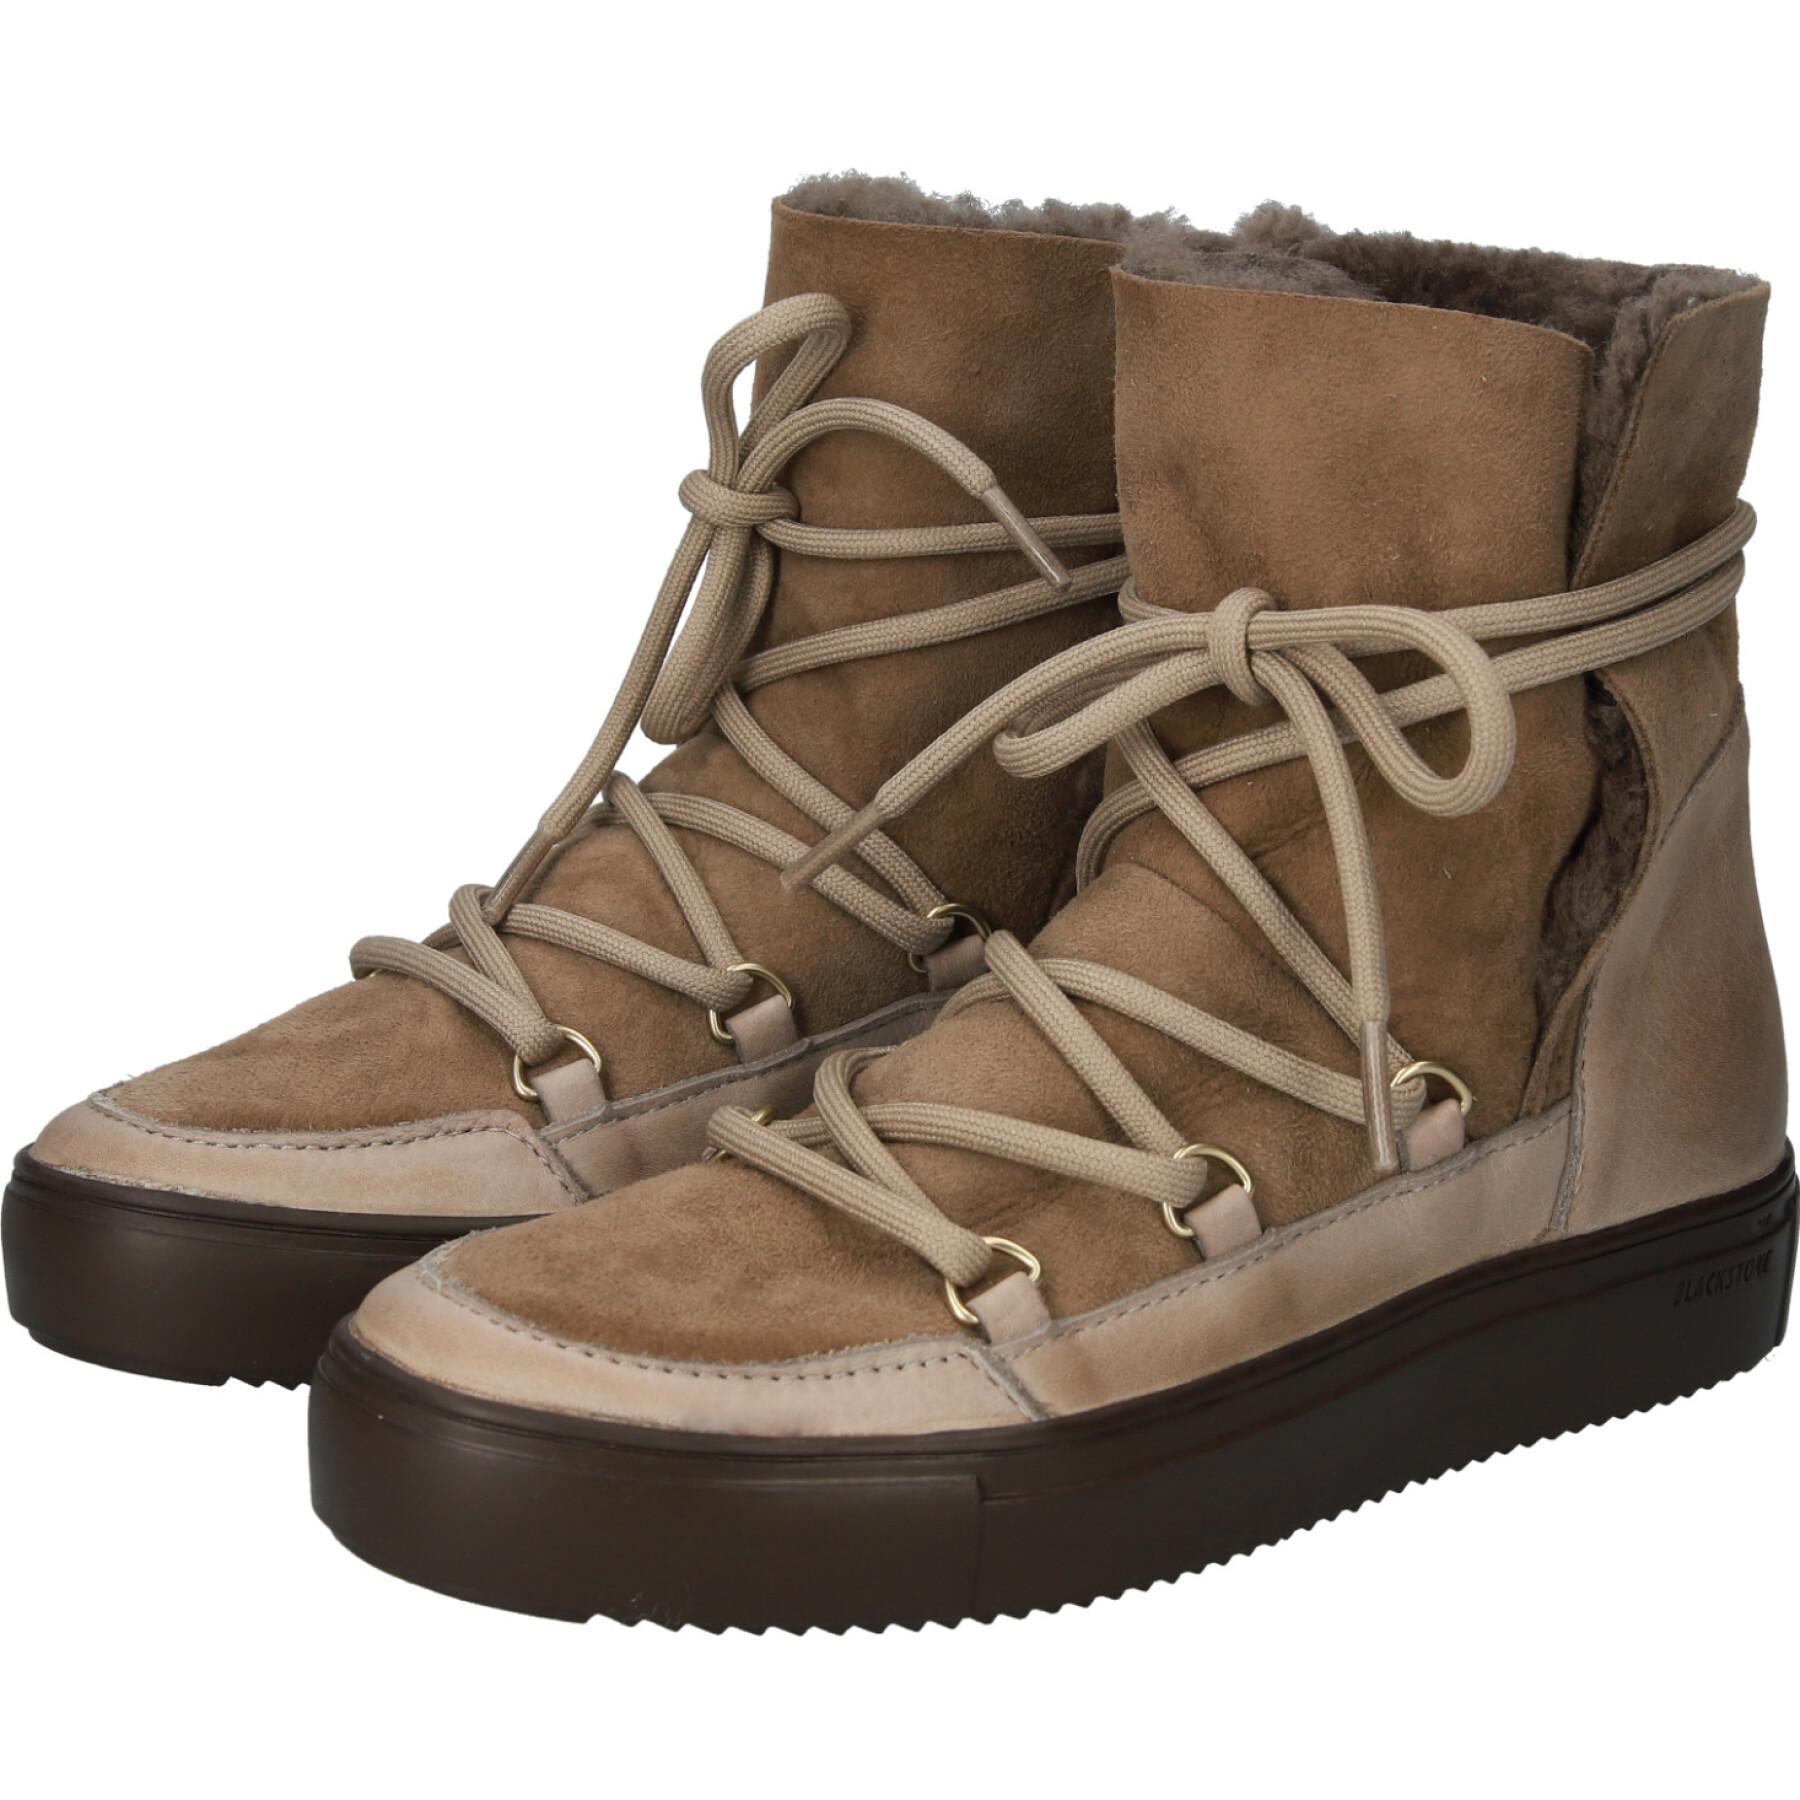 Furry boots for women Blackstone High Top